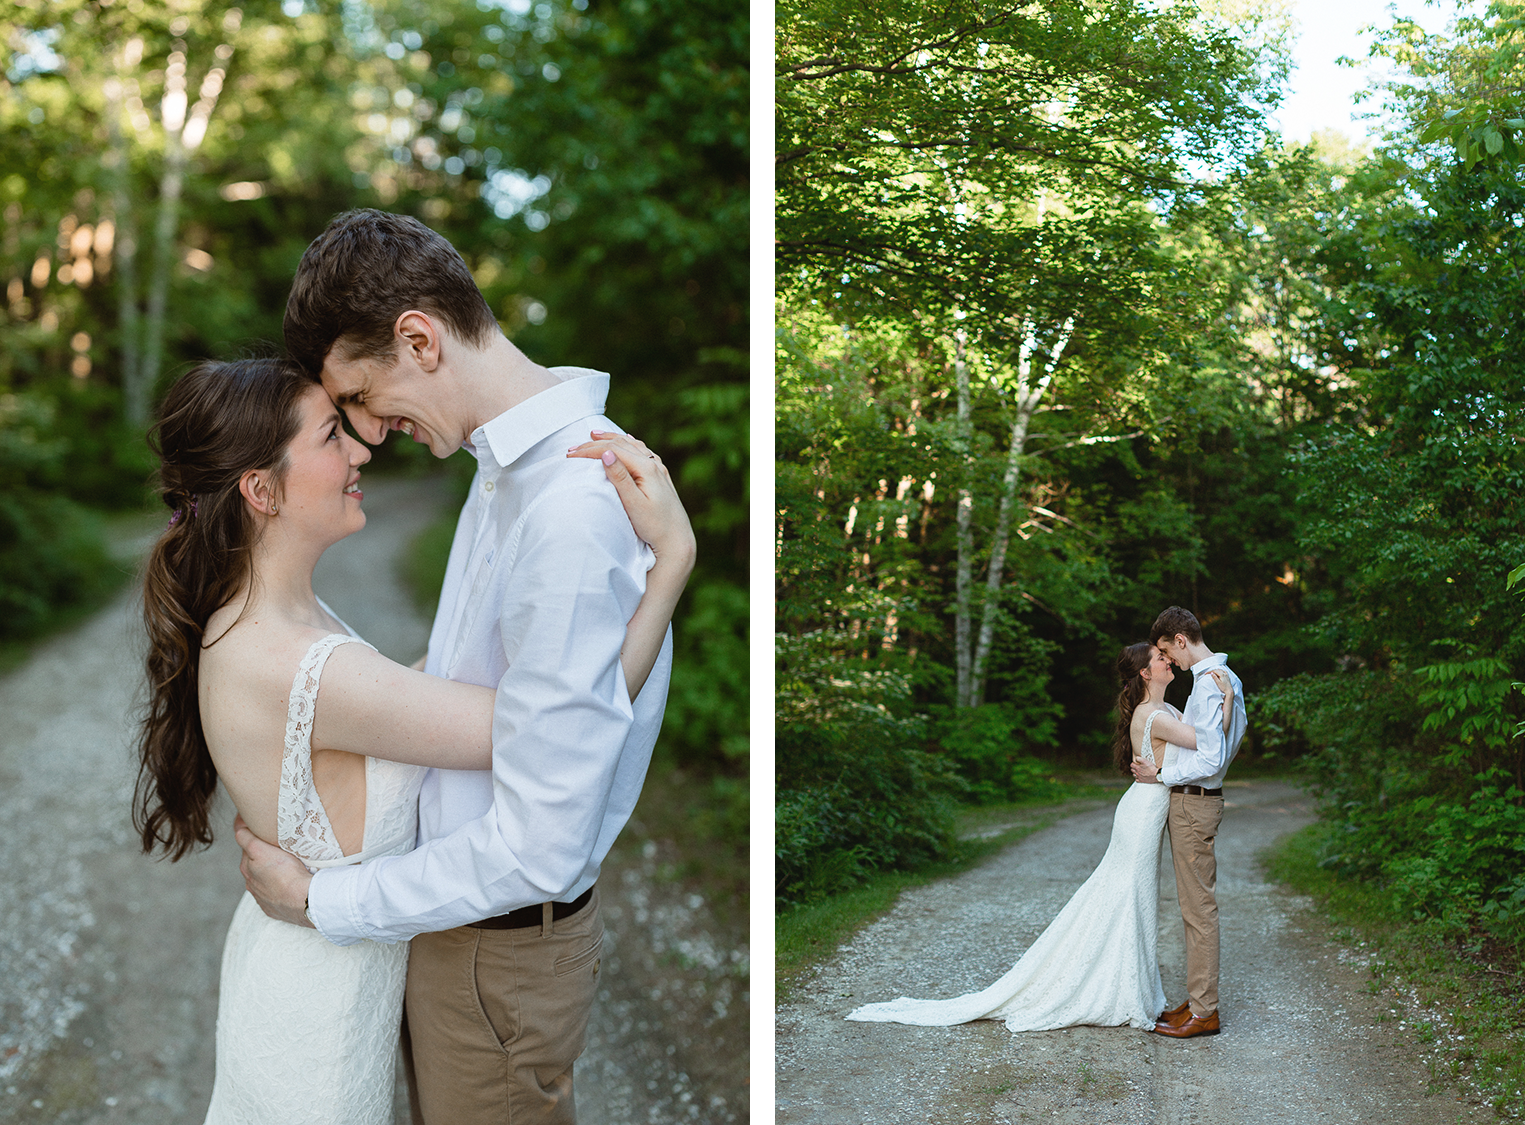 elopement-intimate-wedding-chelsea-quebec-airbnb-ideas-guides-toronto-elopement-photographer-86.PNG